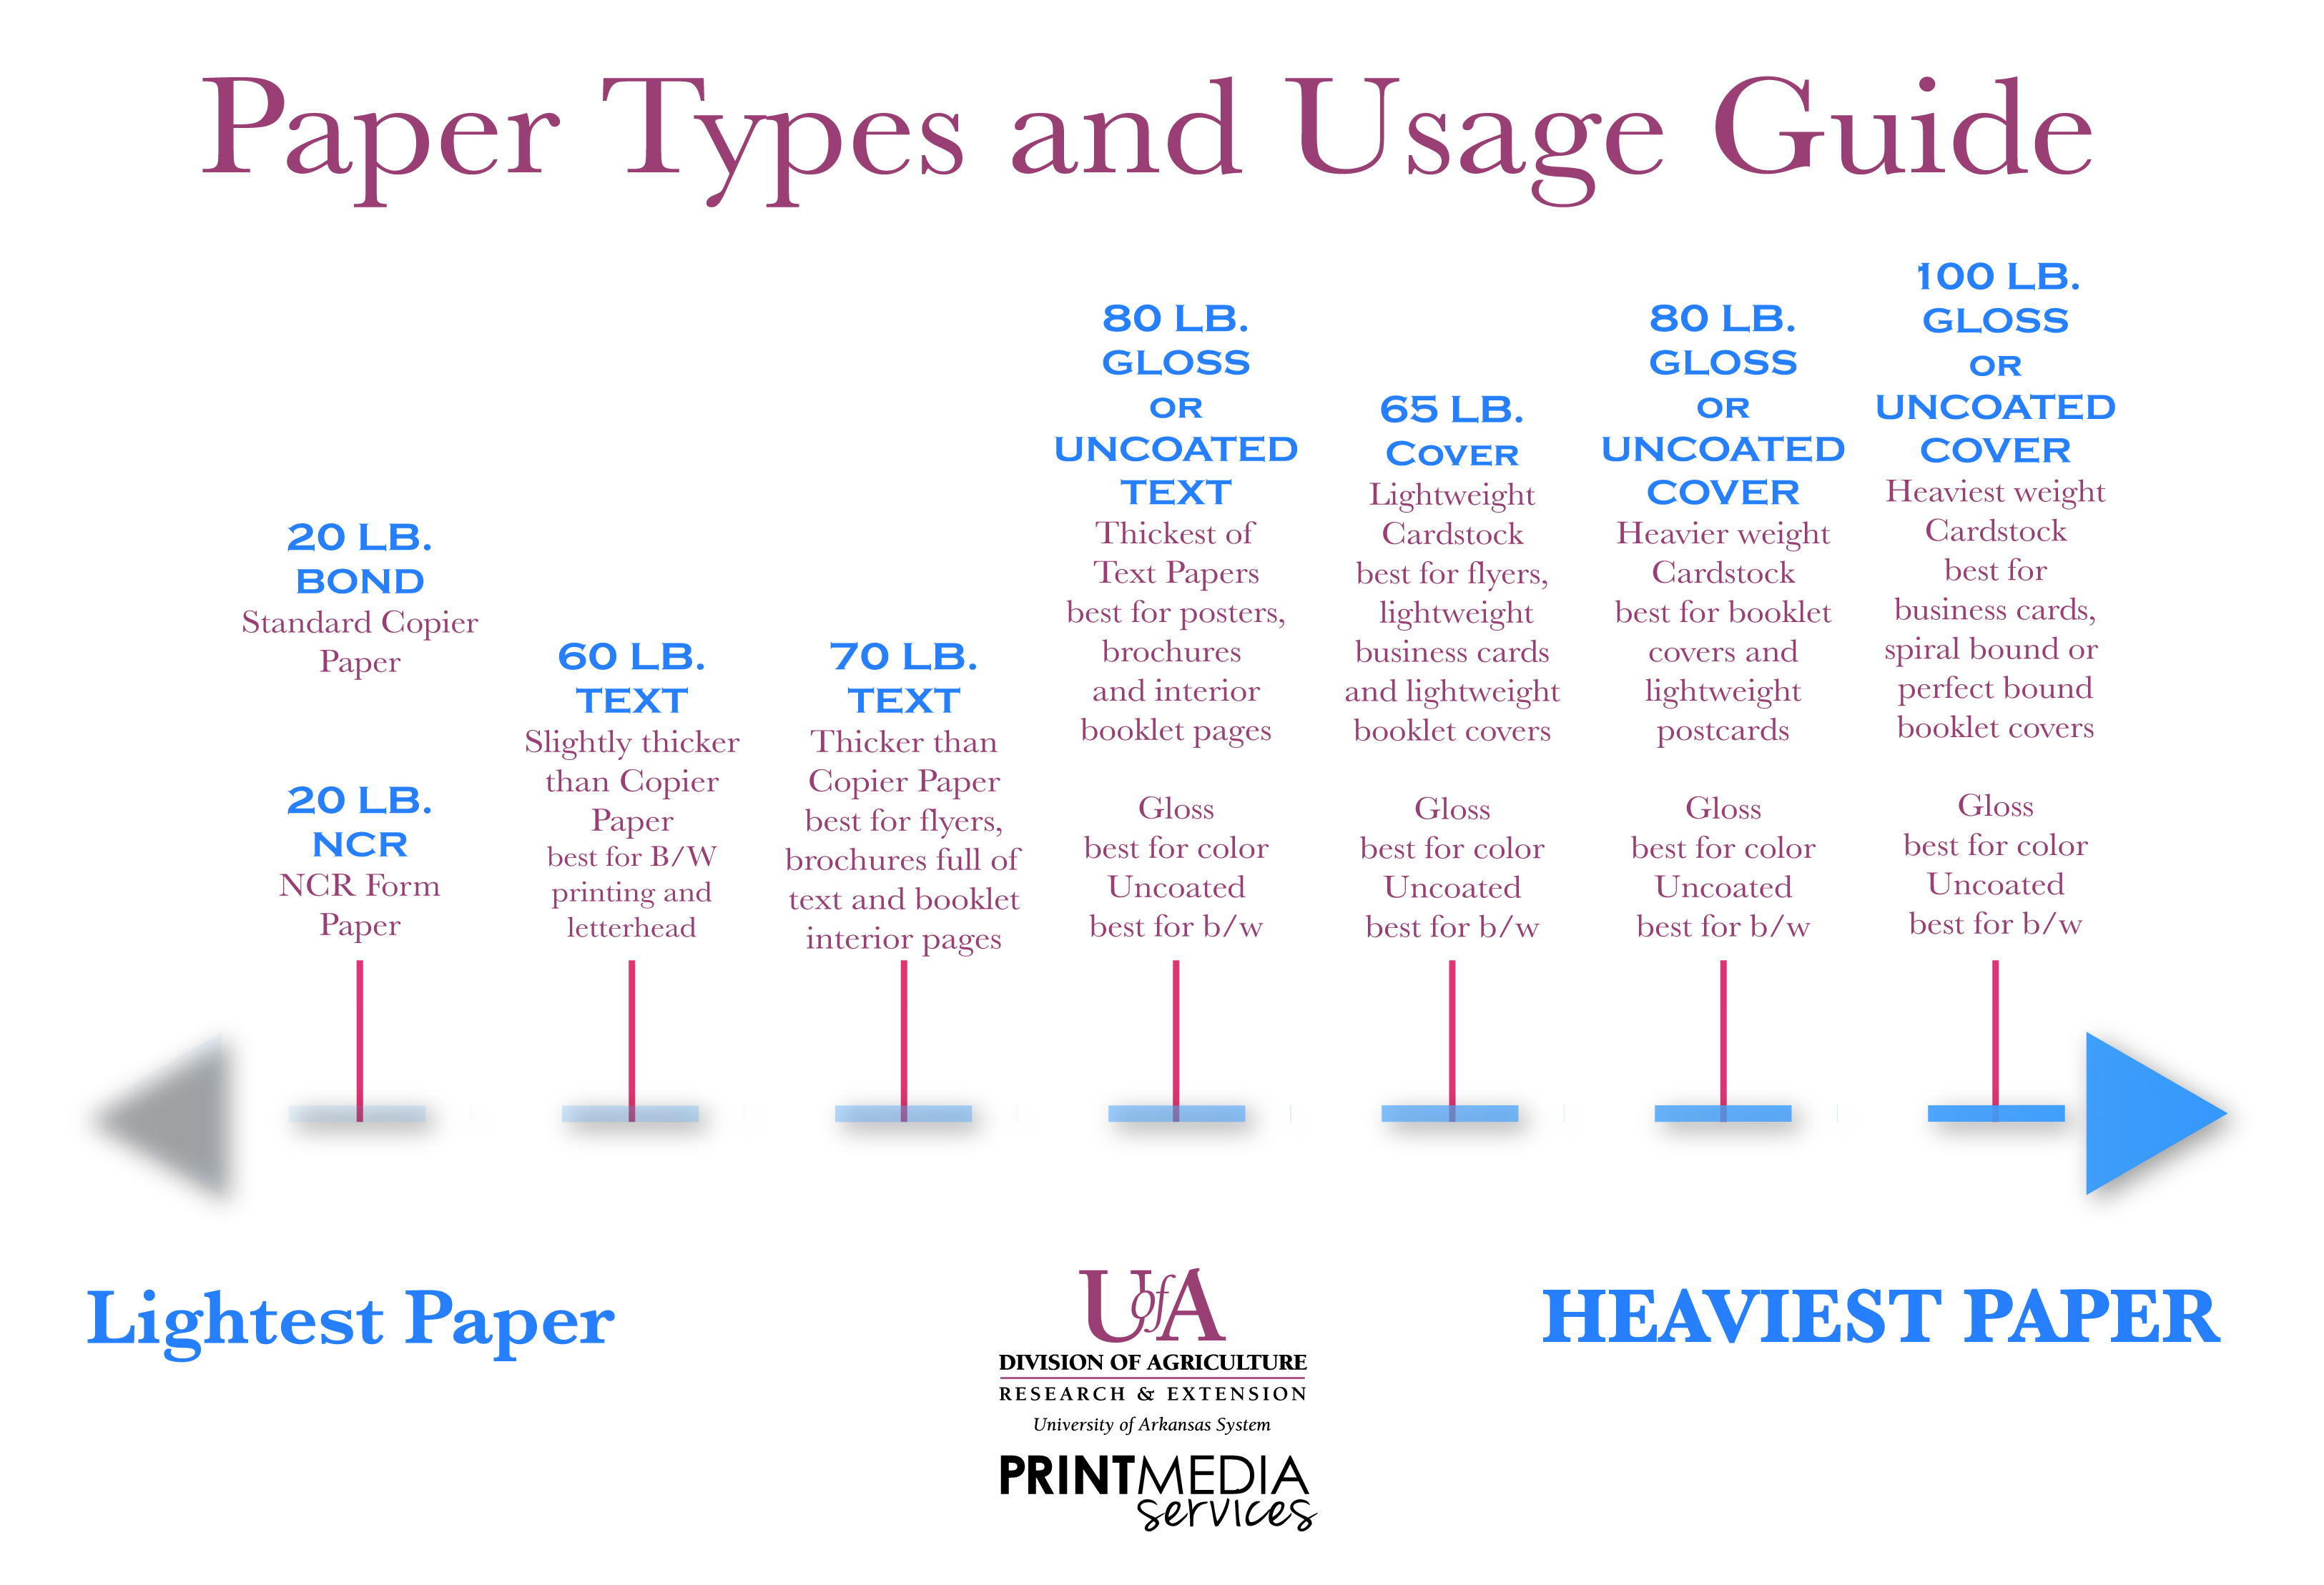 Paper Types and Weights